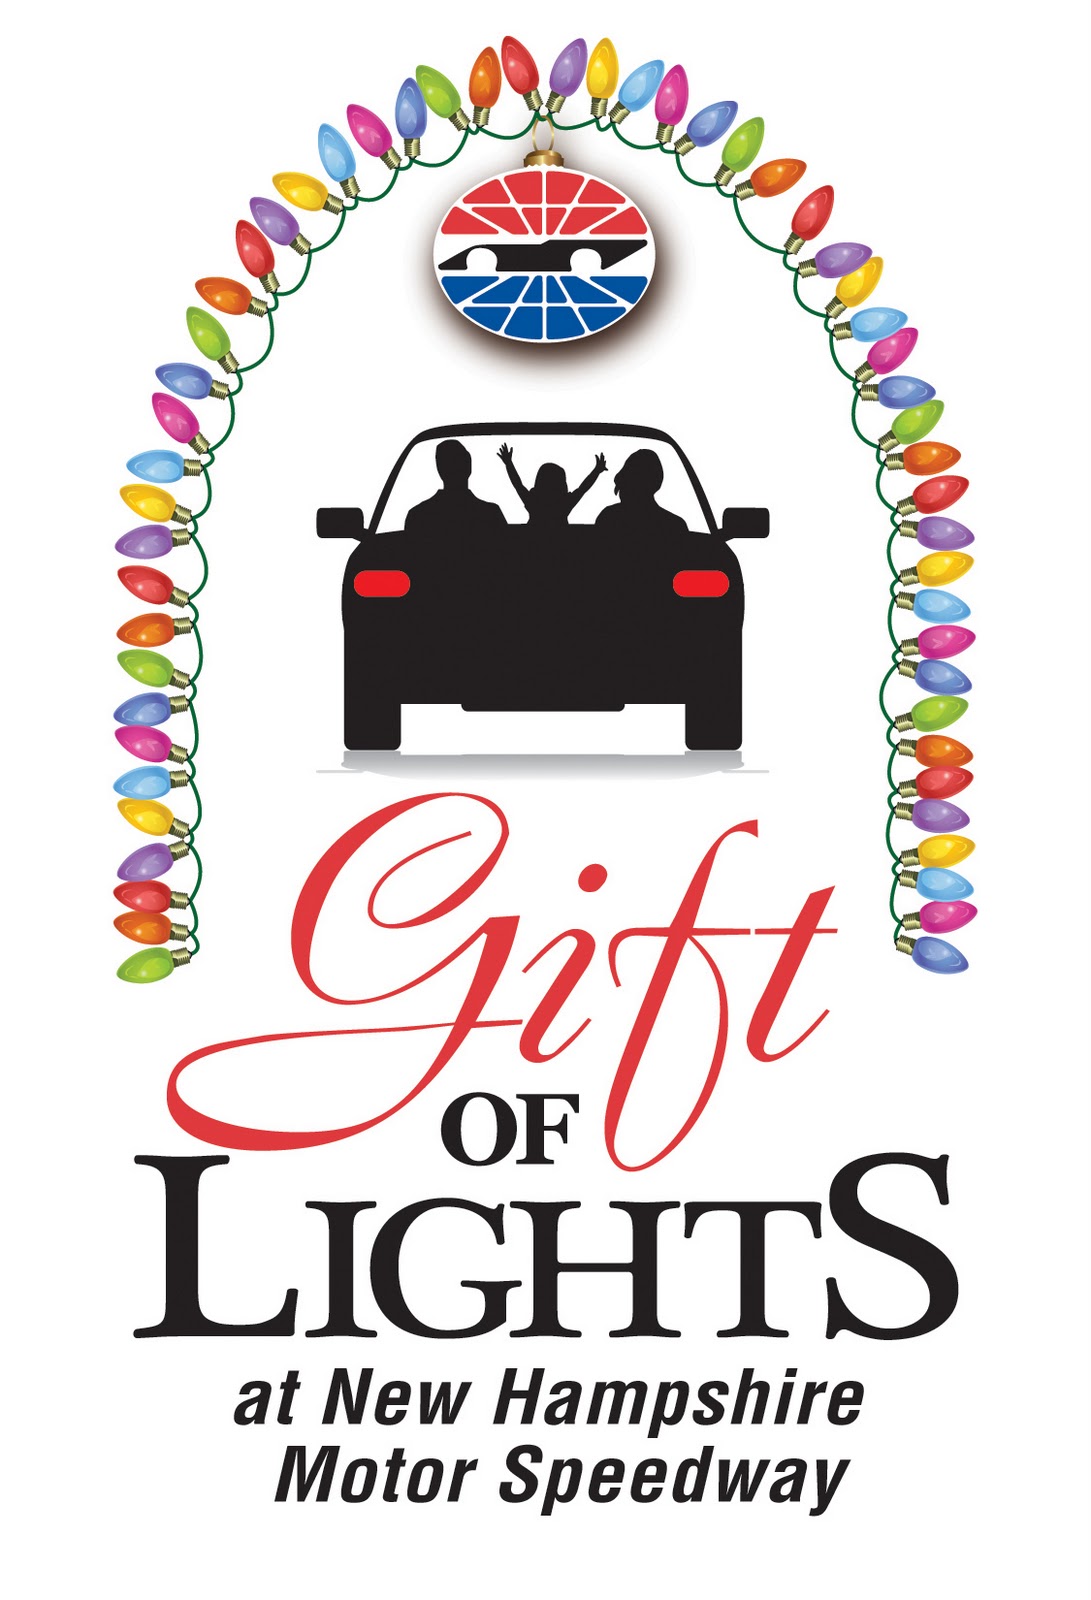 The Gift of Lights at The New Hampshire Motor Speedway